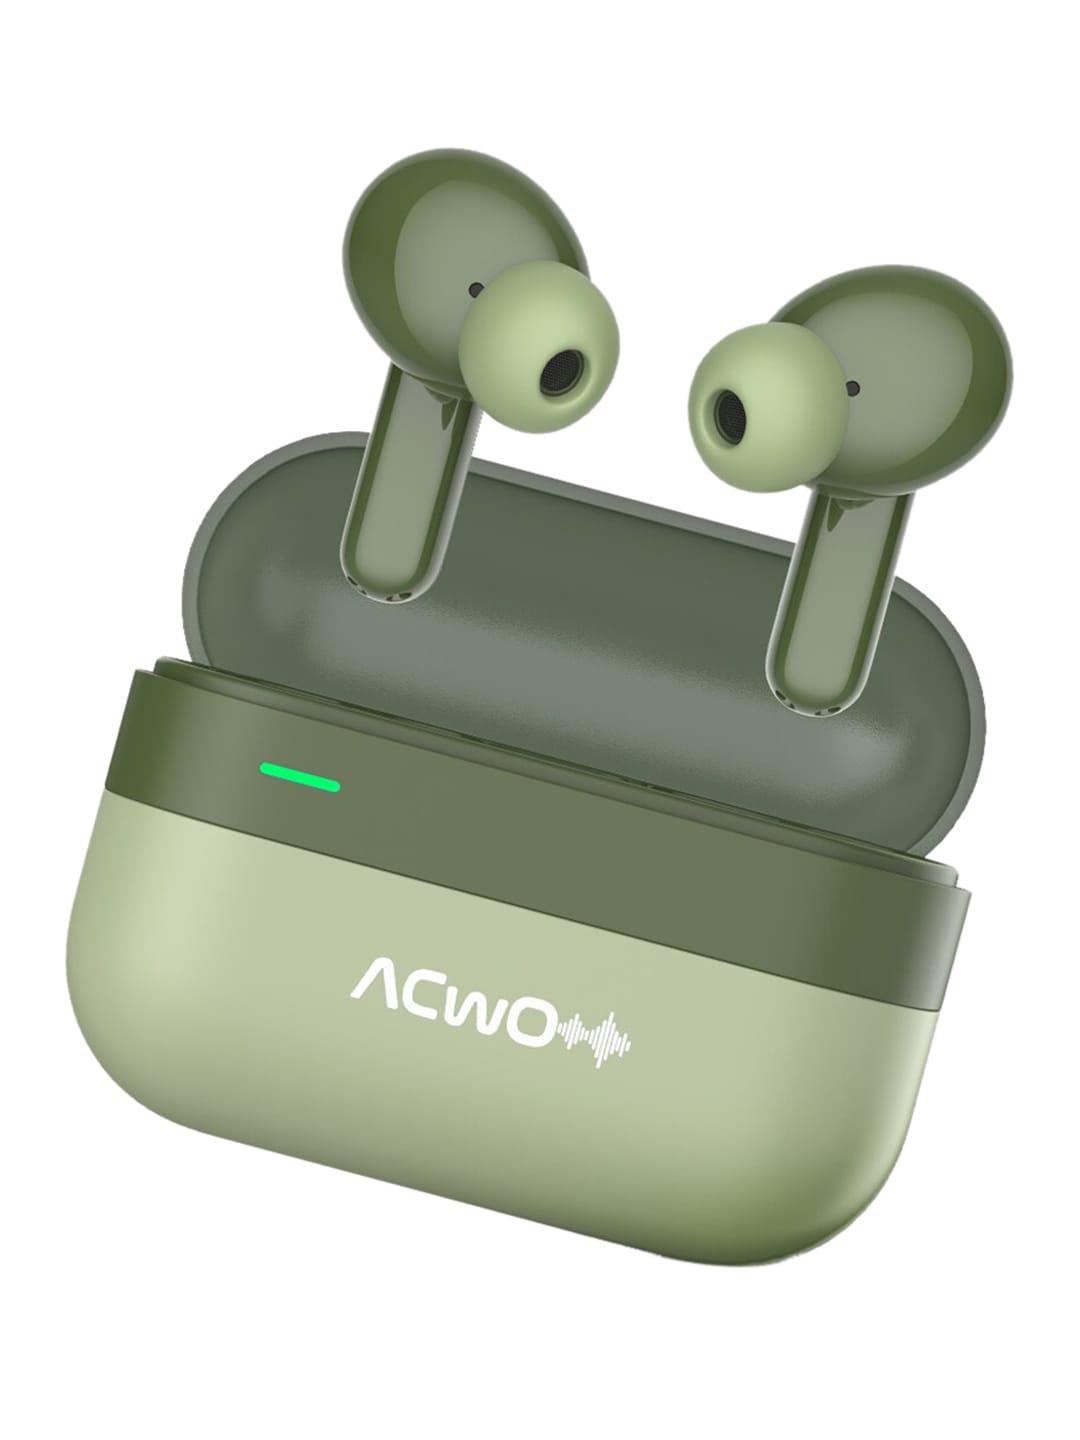 acwo dwots 424 true wireless earbuds 50 hrs playtime with quad mic enc & gaming mode